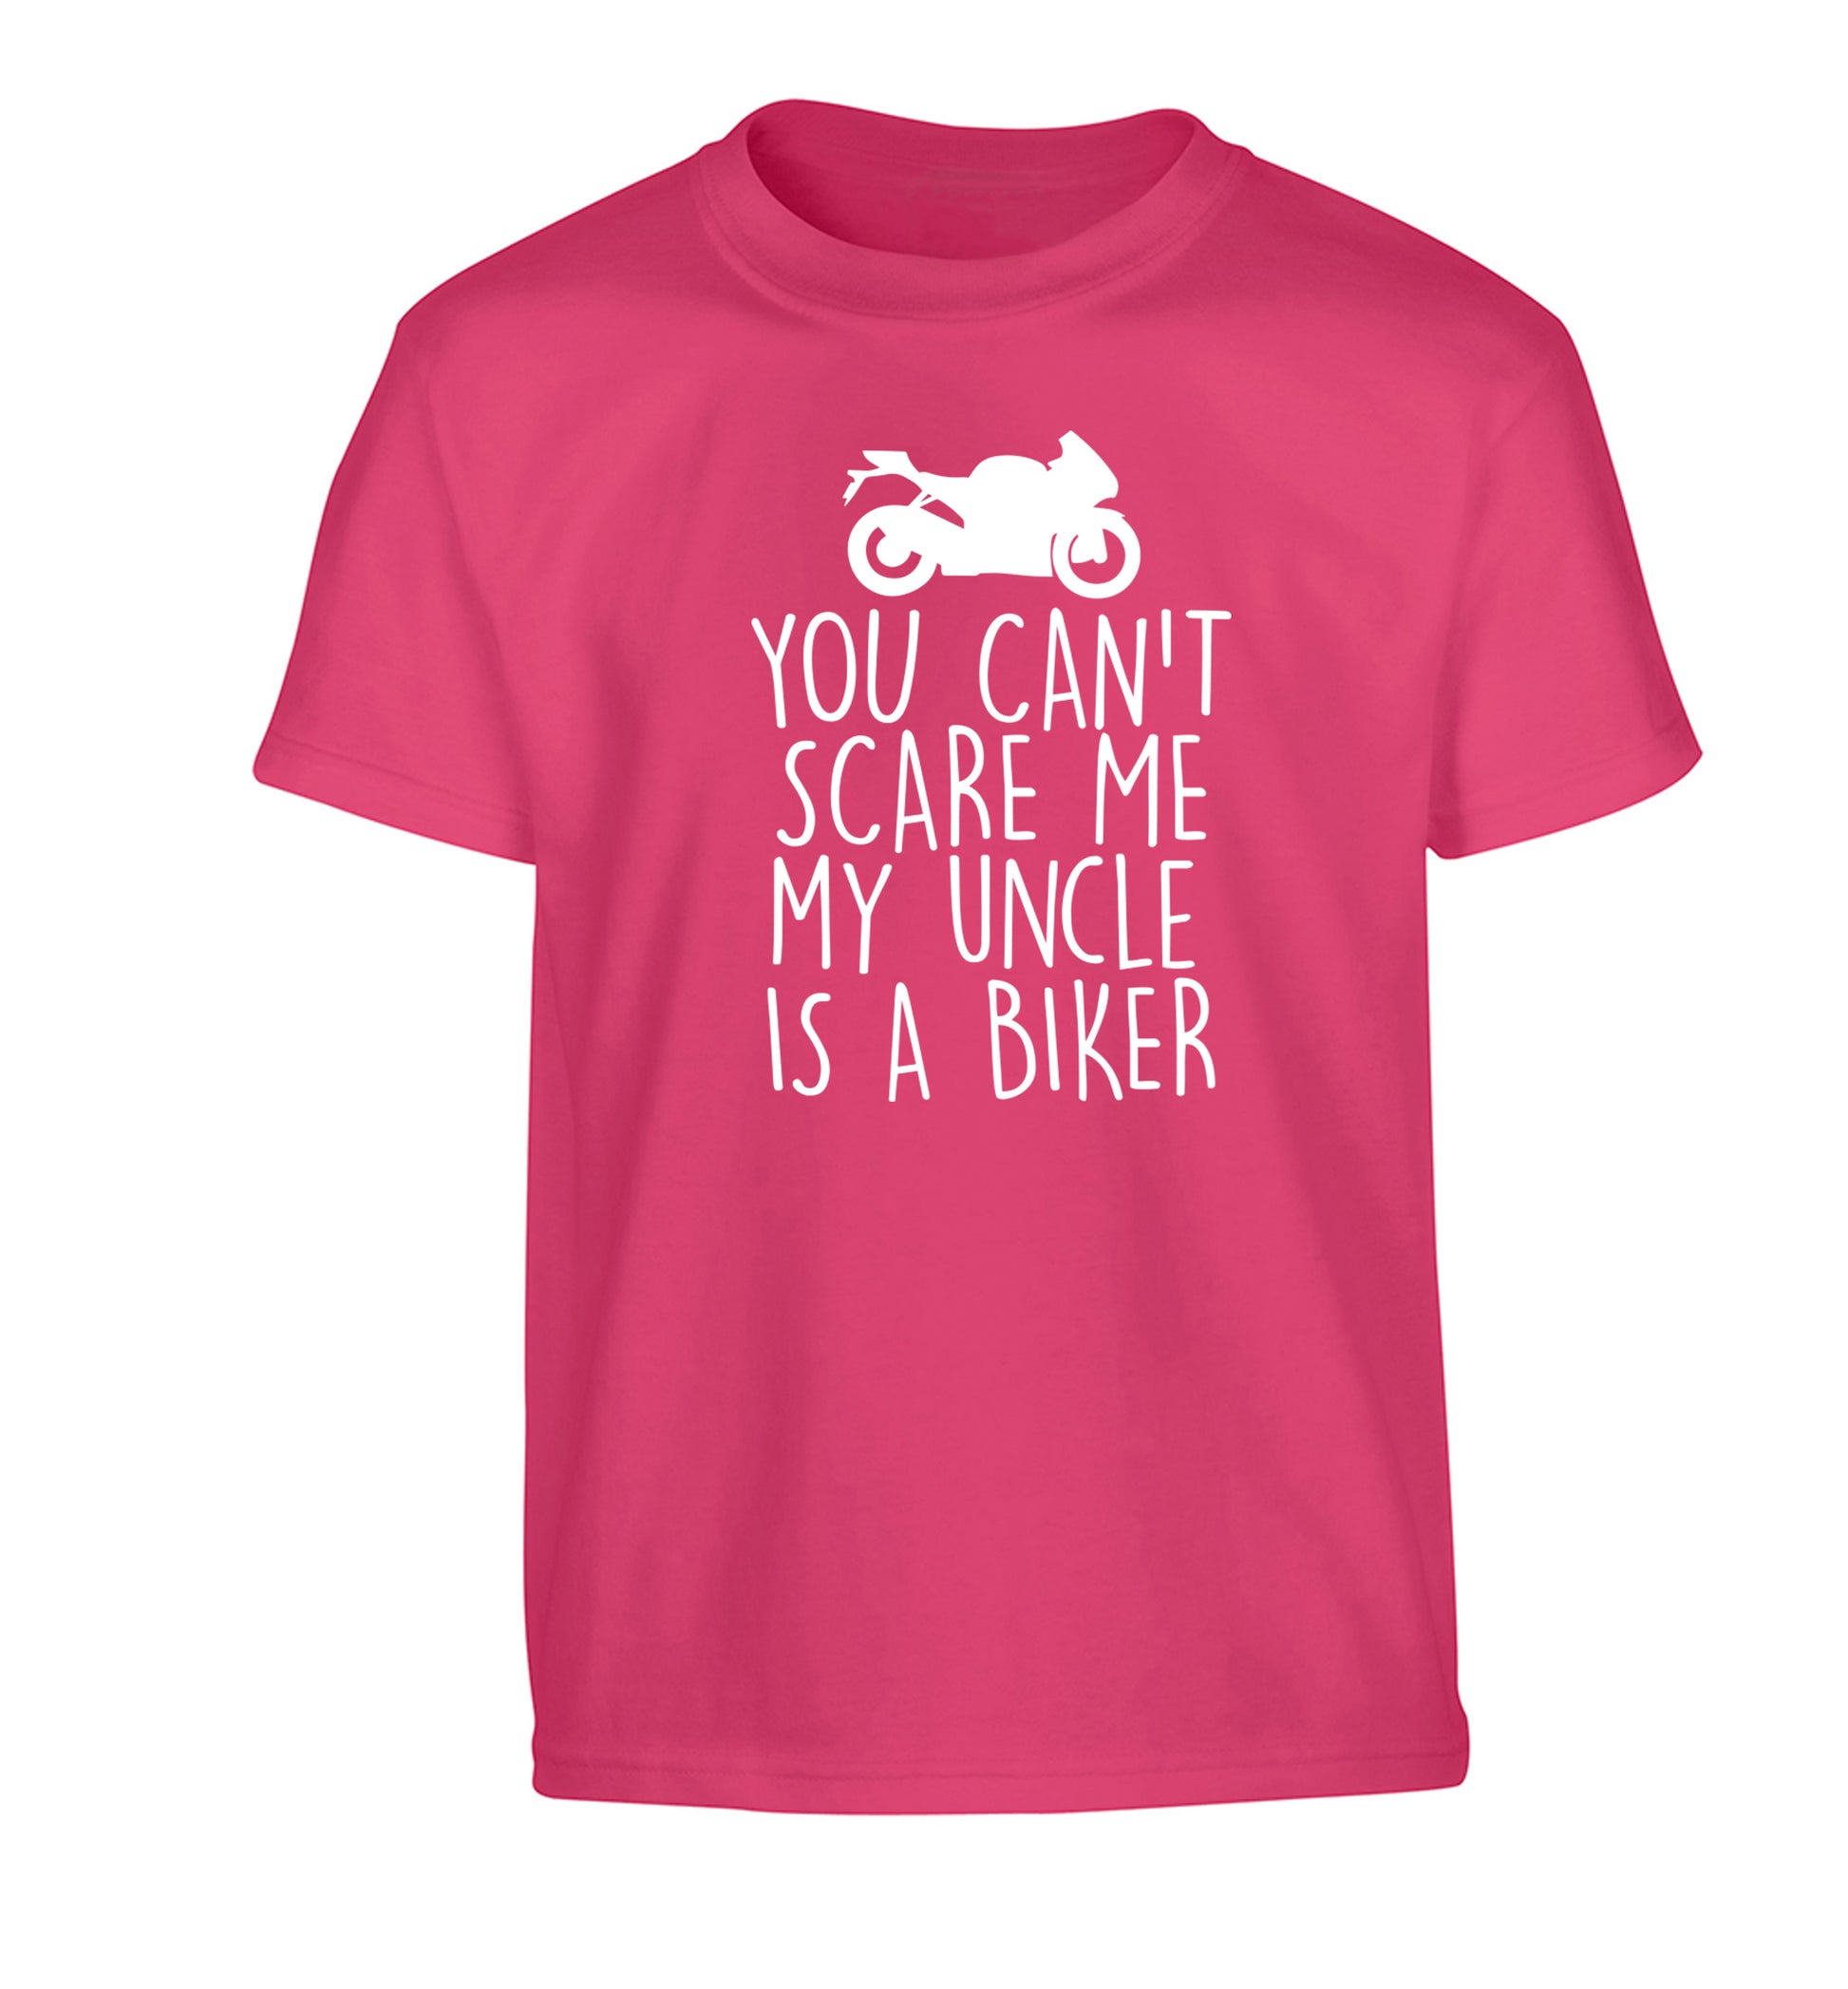 You can't scare me my uncle is a biker Children's pink Tshirt 12-13 Years